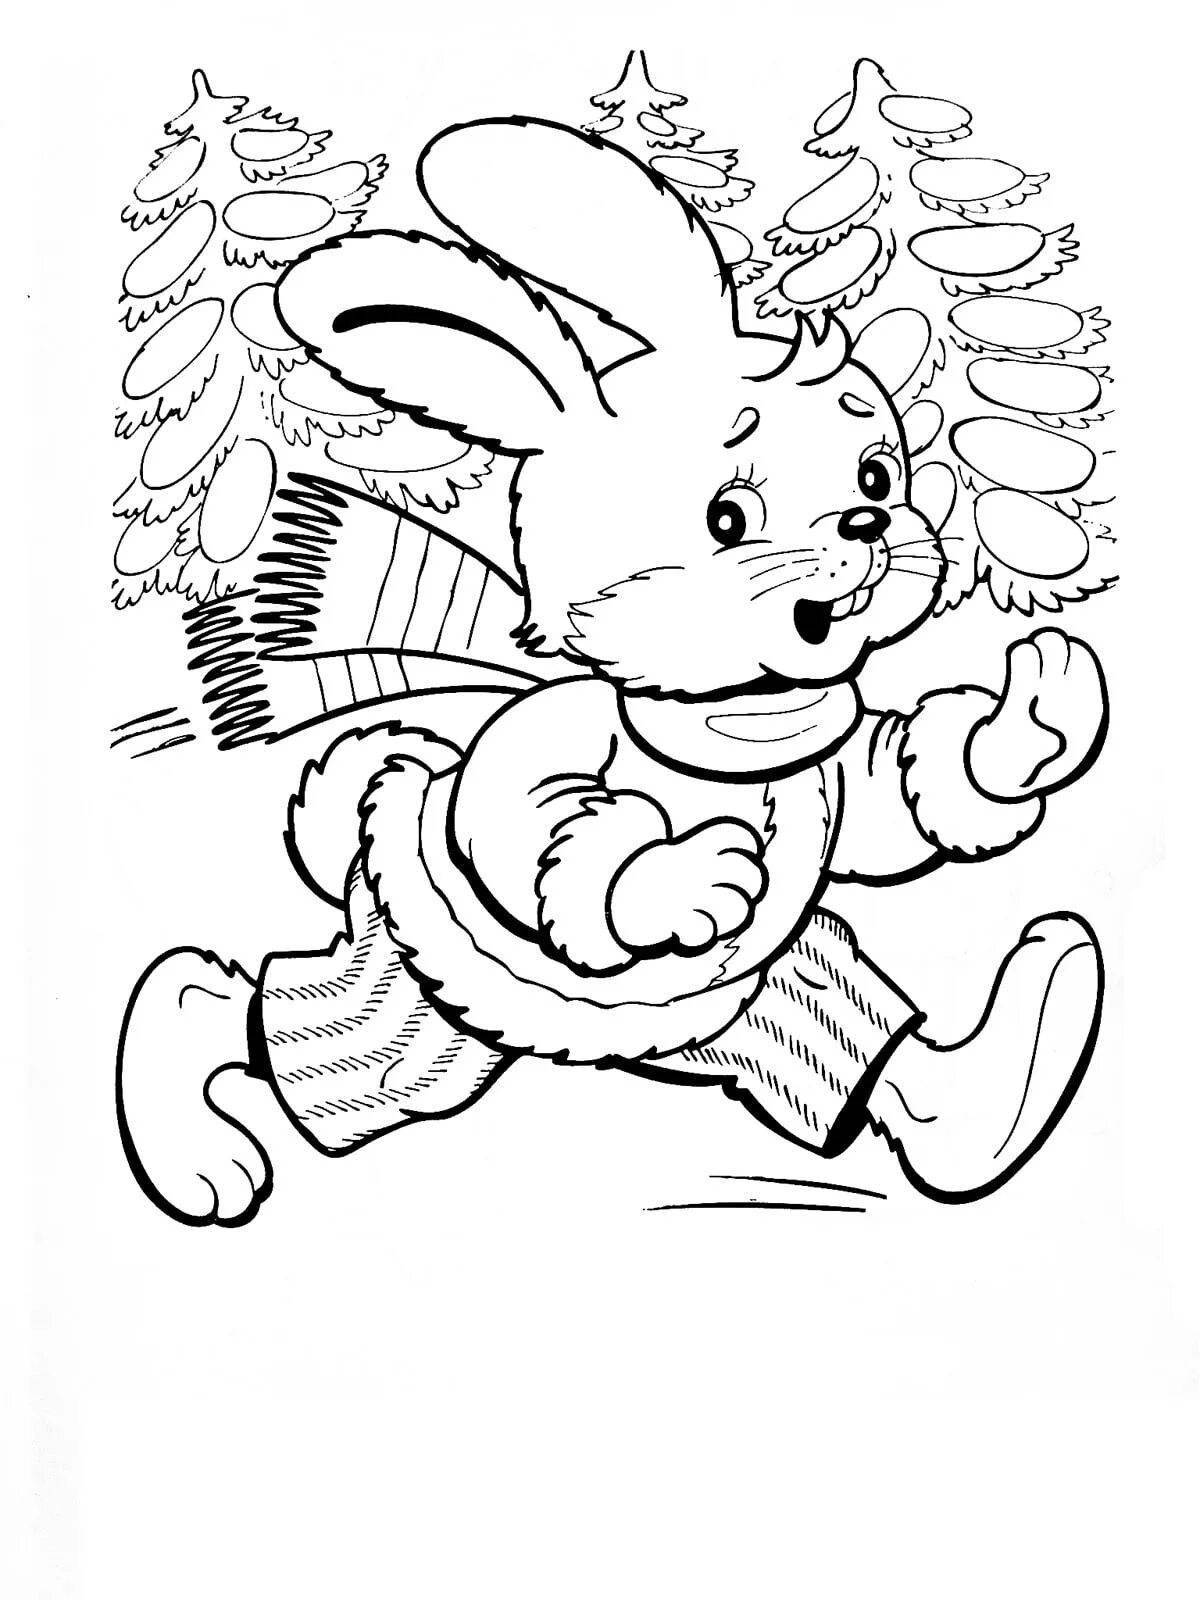 Exquisite frost and hare coloring book